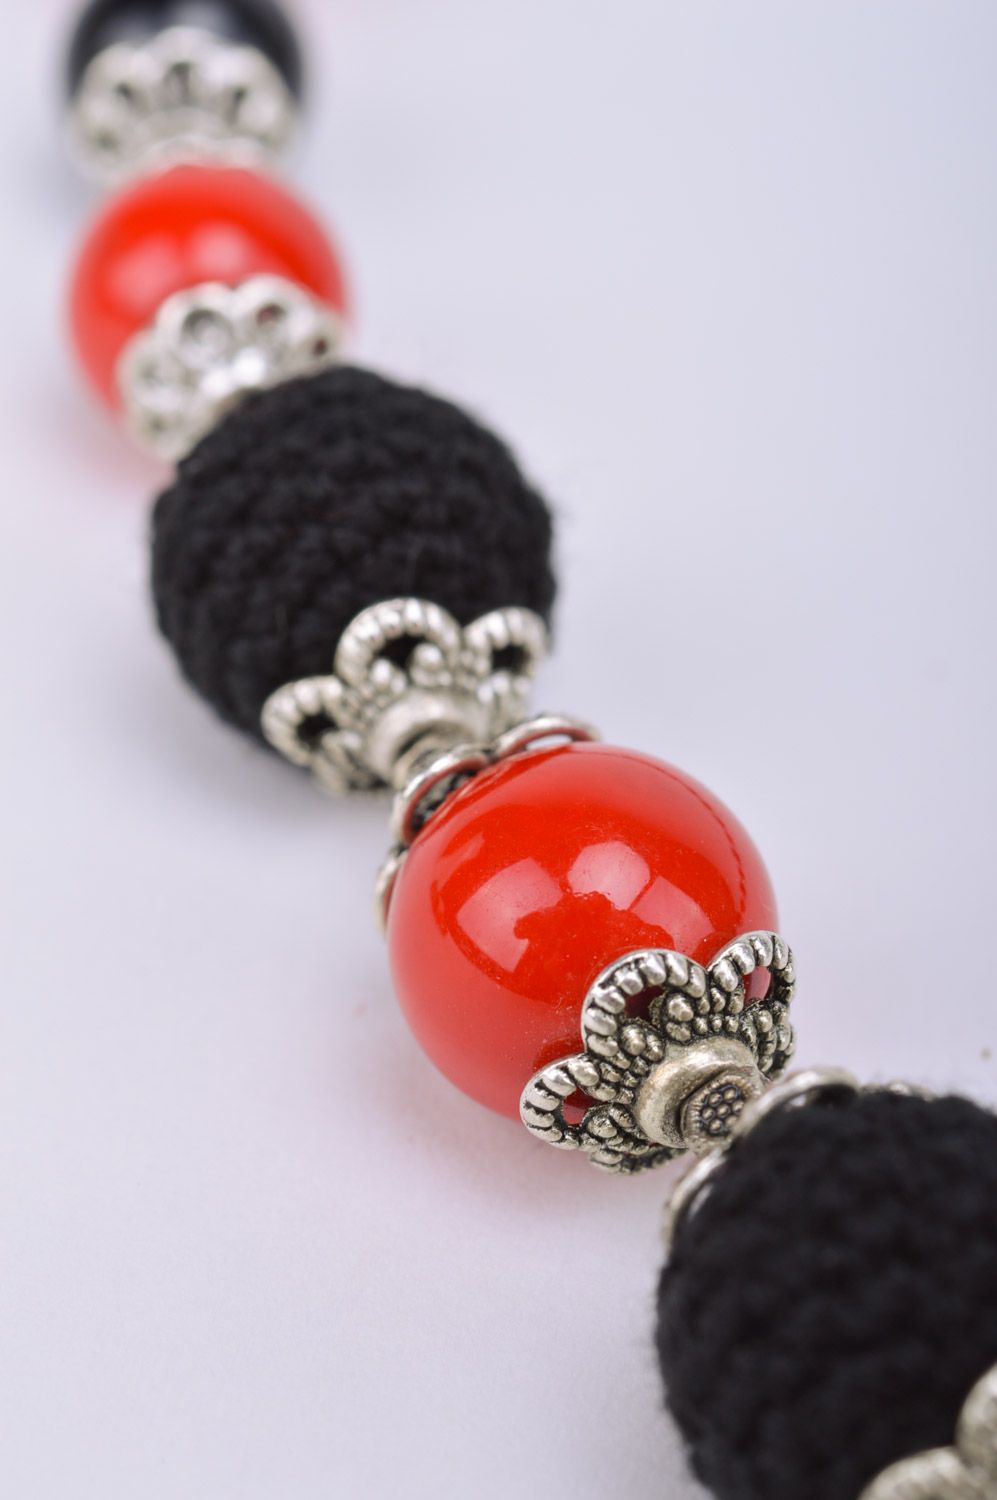 Handmade textile jewelry set 3 items crochet over bead necklace bracelet and earrings of red and black colors photo 4